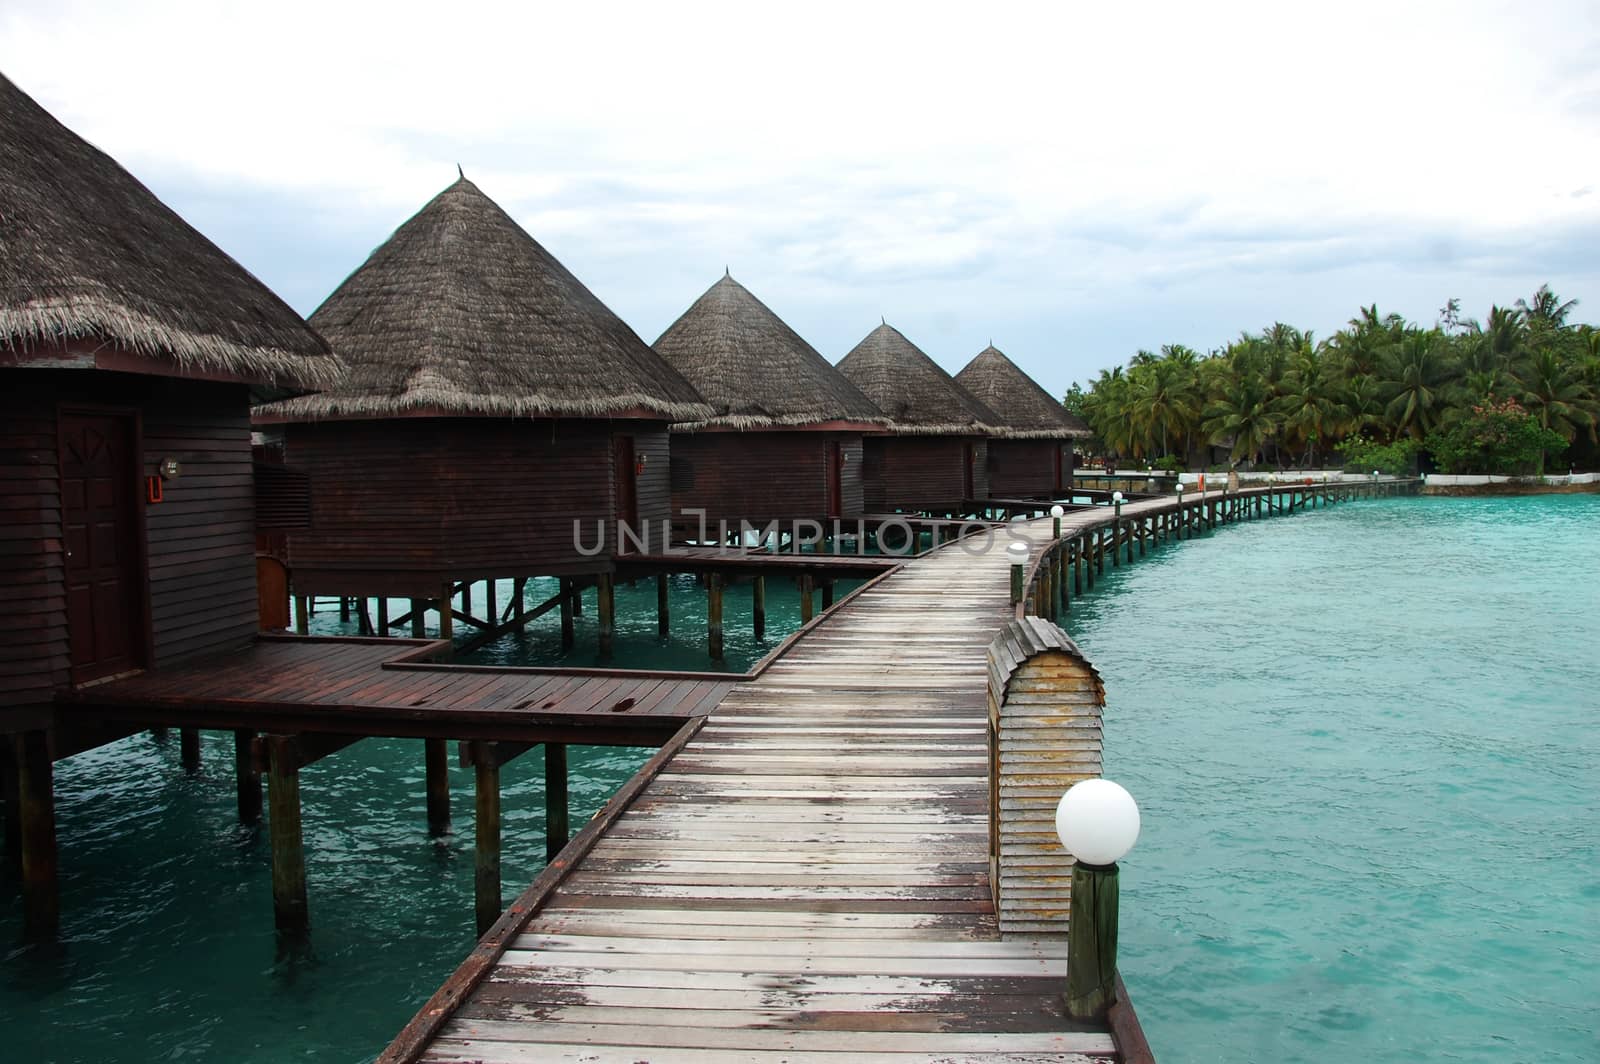 Bungalow and timber pier at island resort Maldives, Asia, Indian Ocean